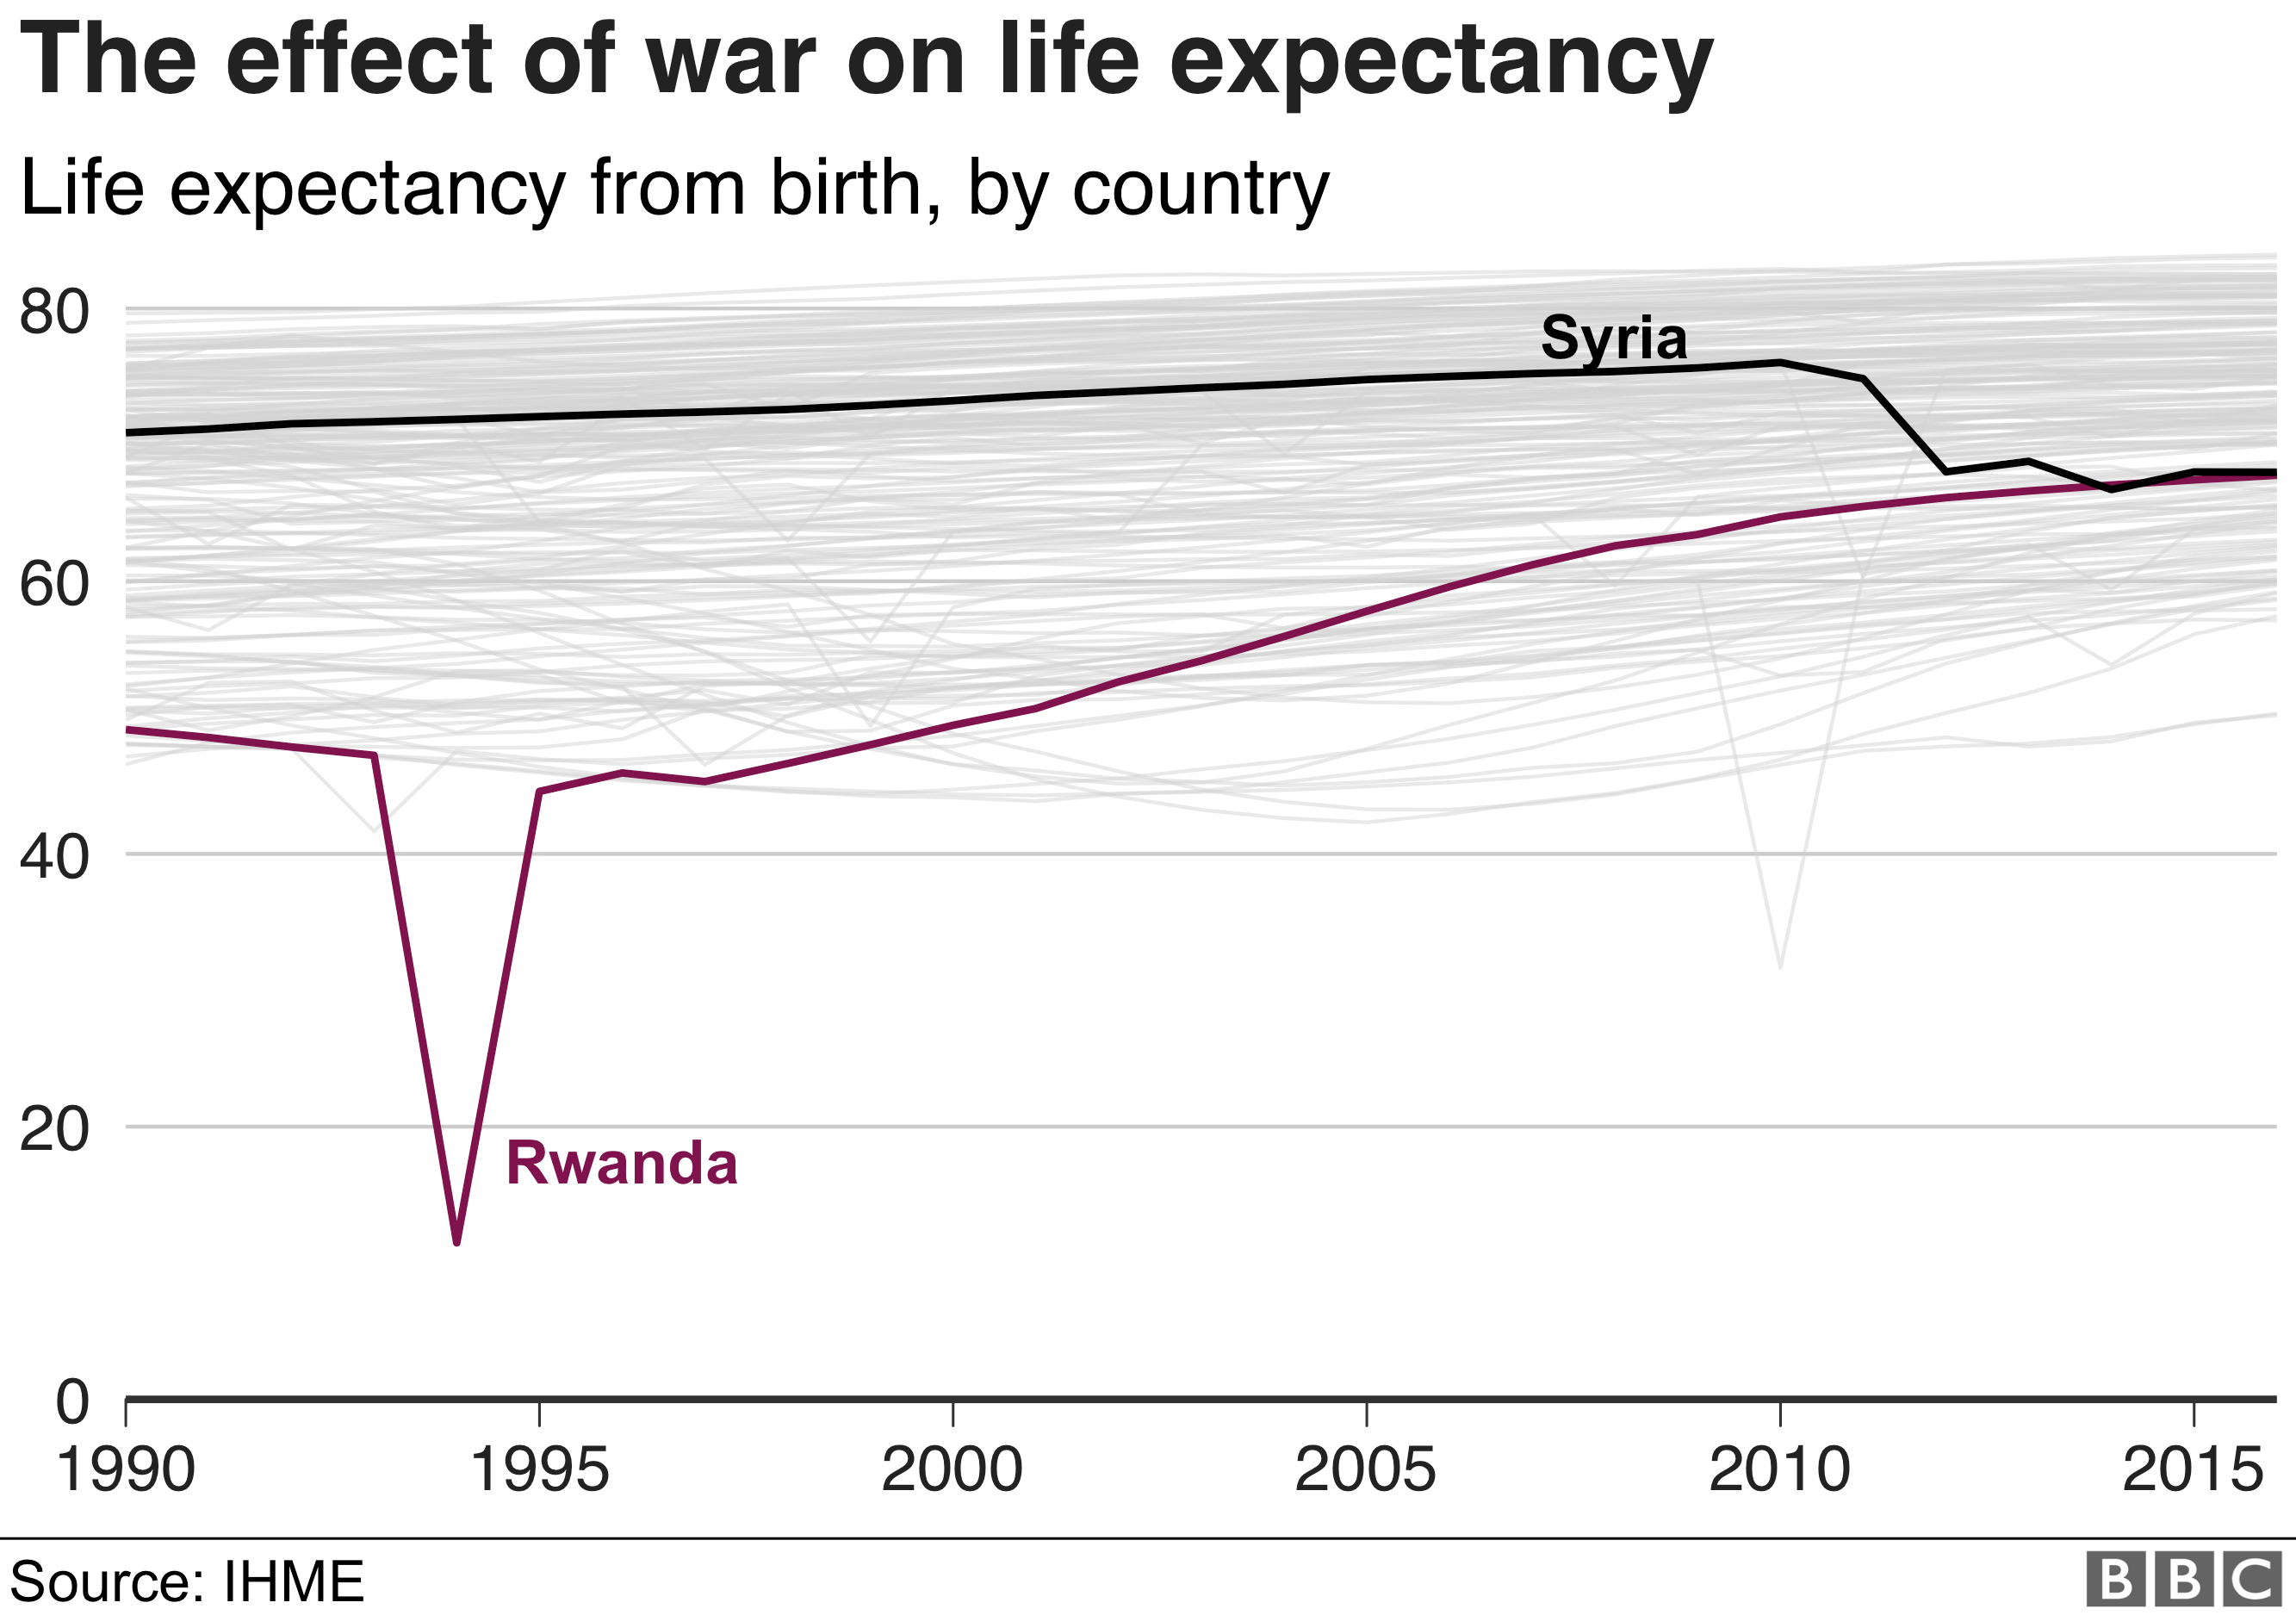 Wars in Rwanda, Syria and Afghanistan have had a serious effect on life expectancy